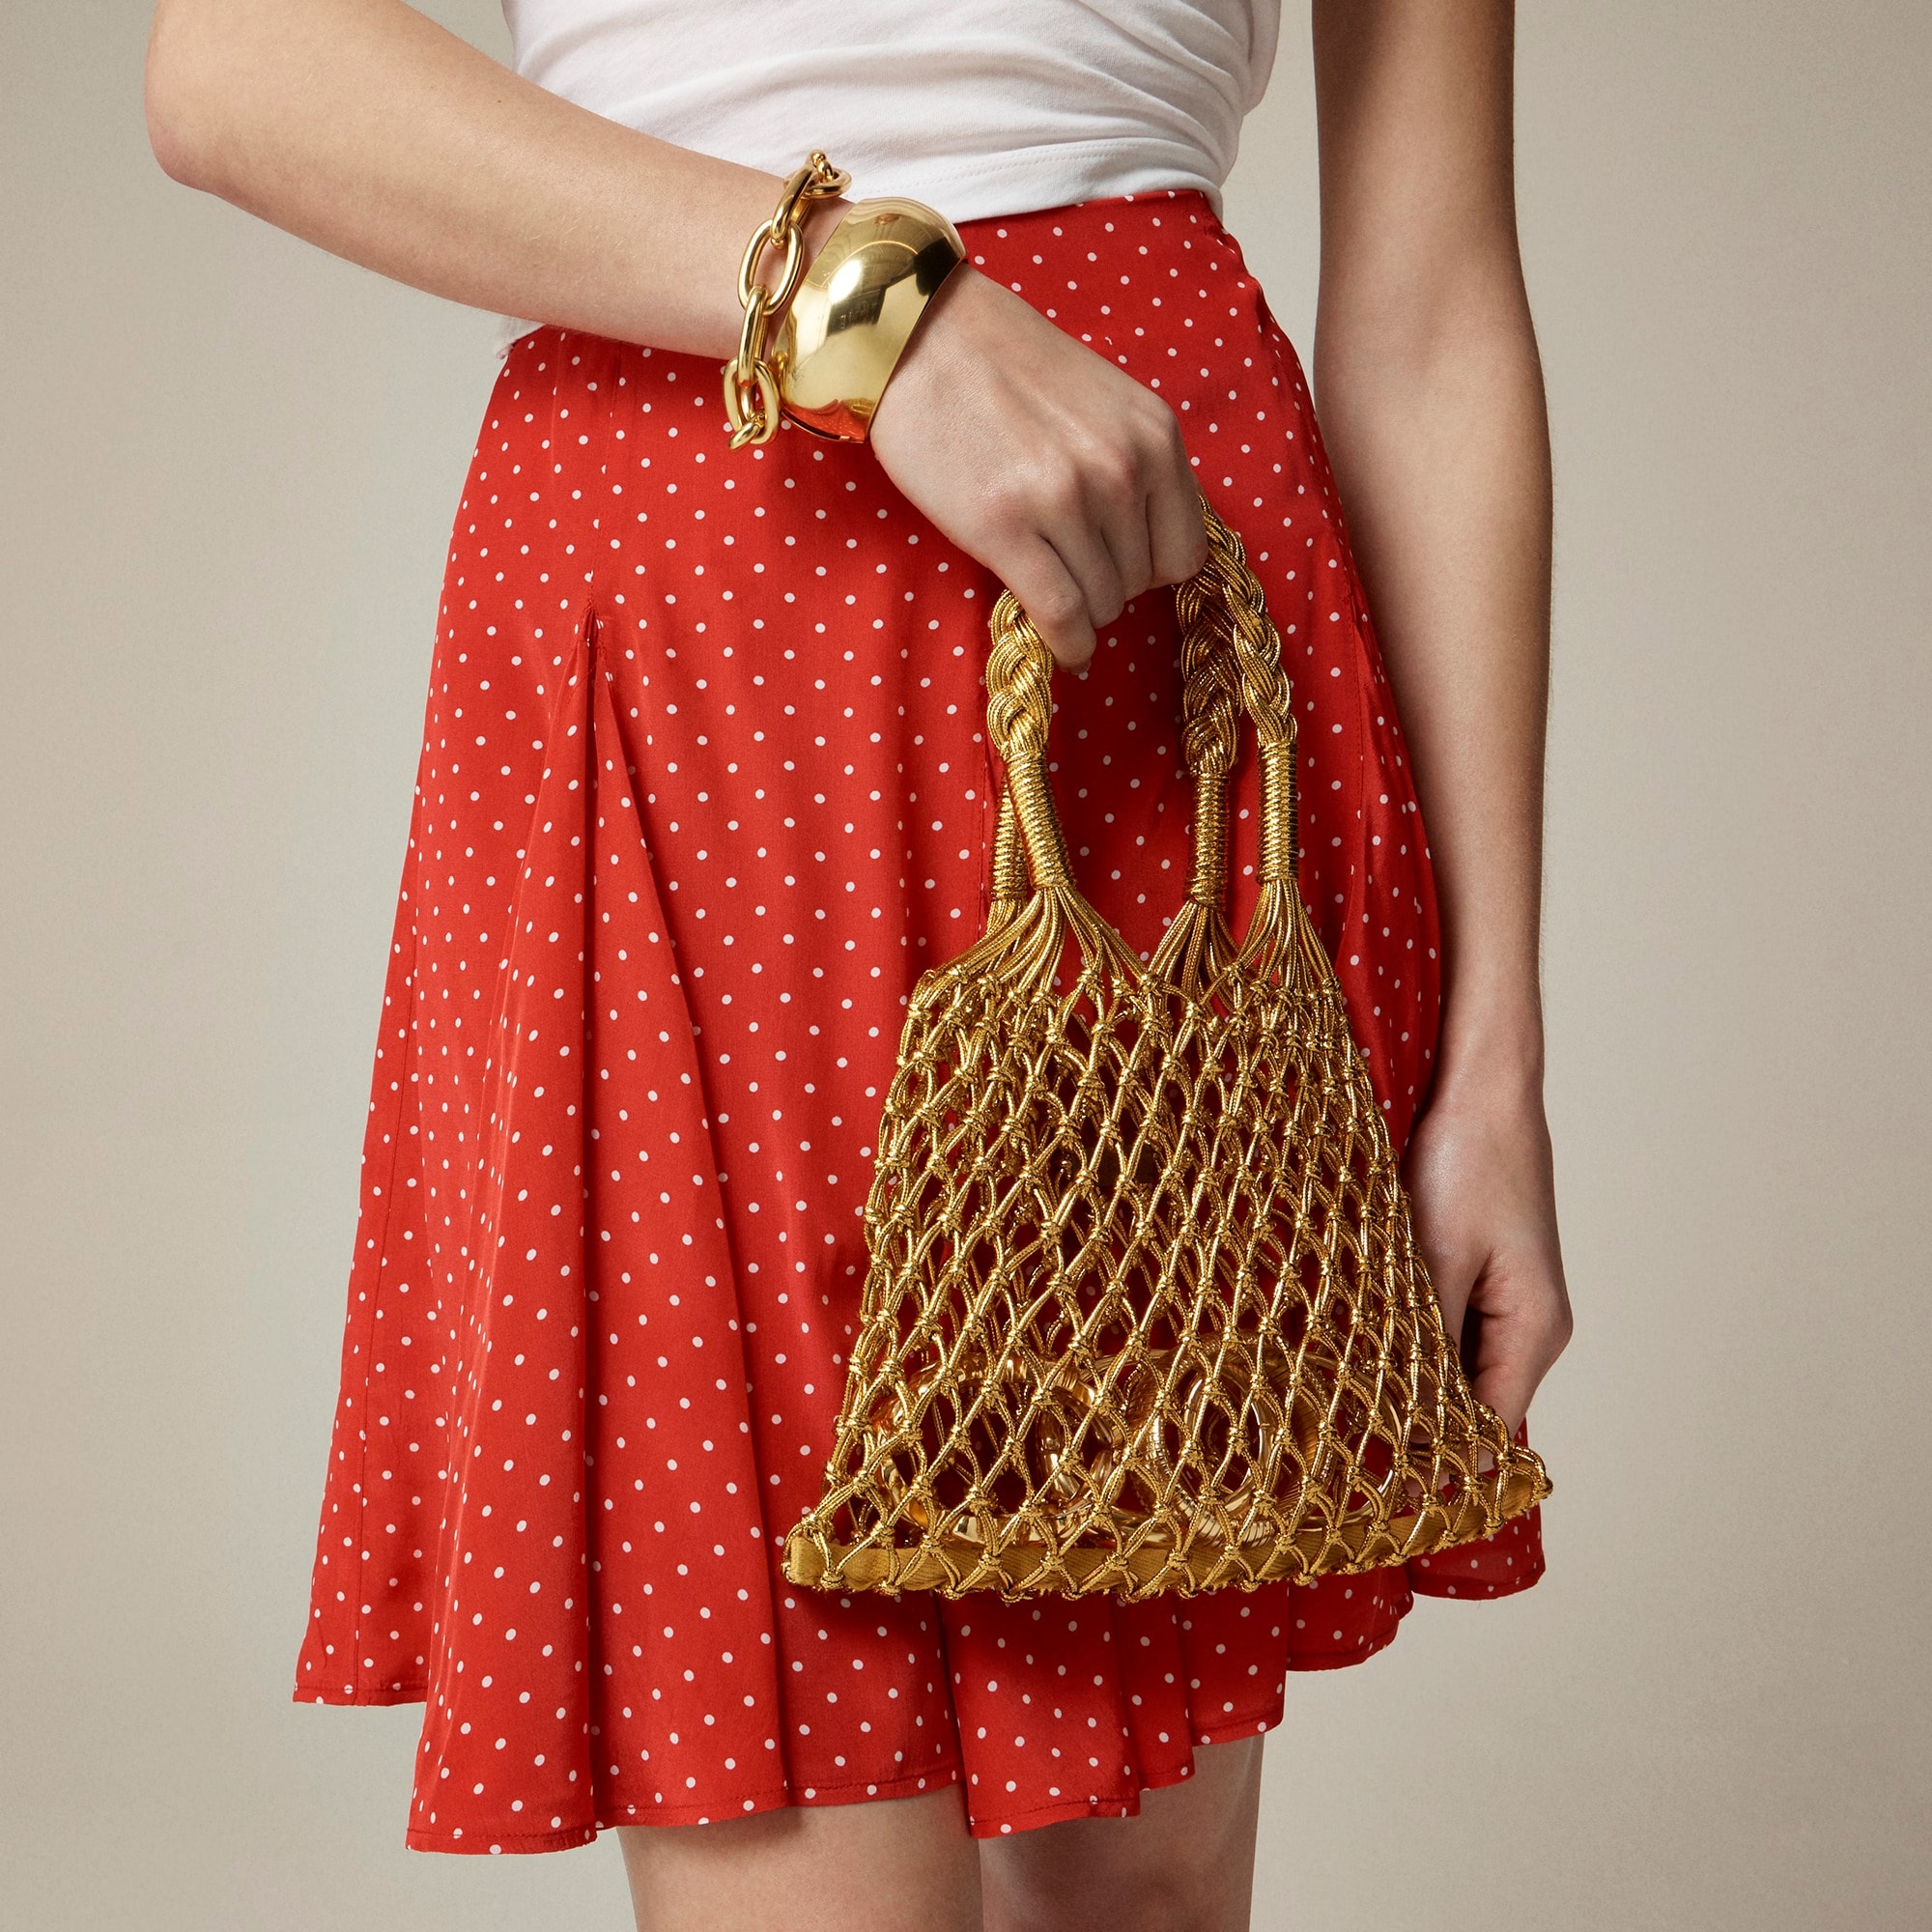  Small Cadiz hand-knotted rope tote in metallic